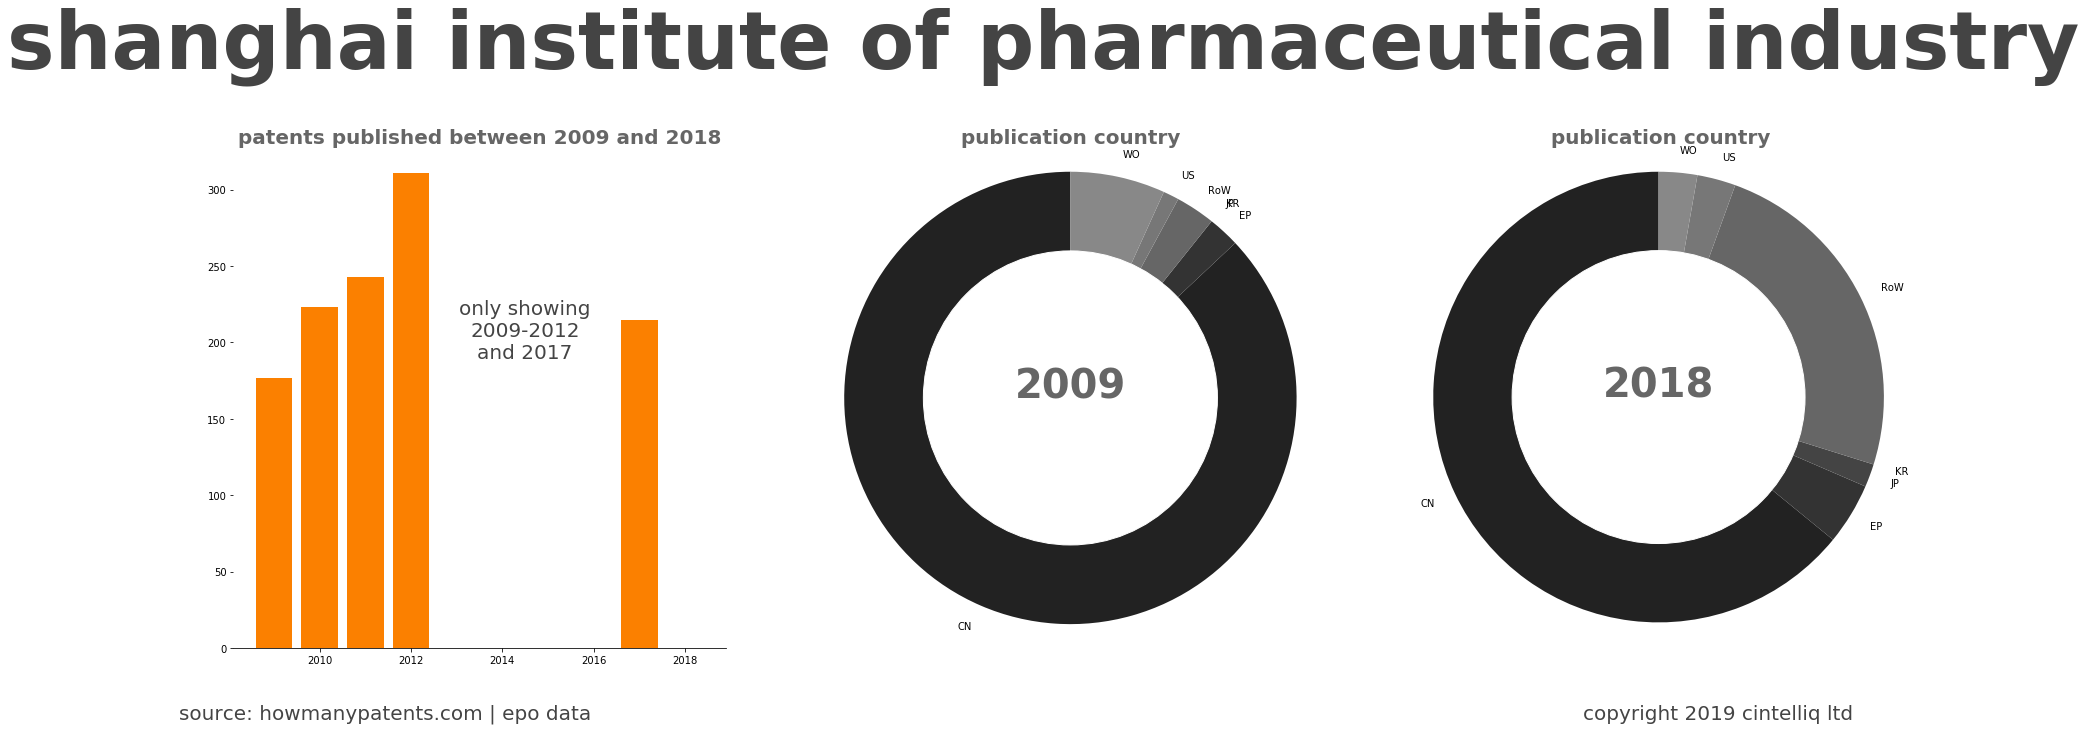 summary of patents for Shanghai Institute Of Pharmaceutical Industry